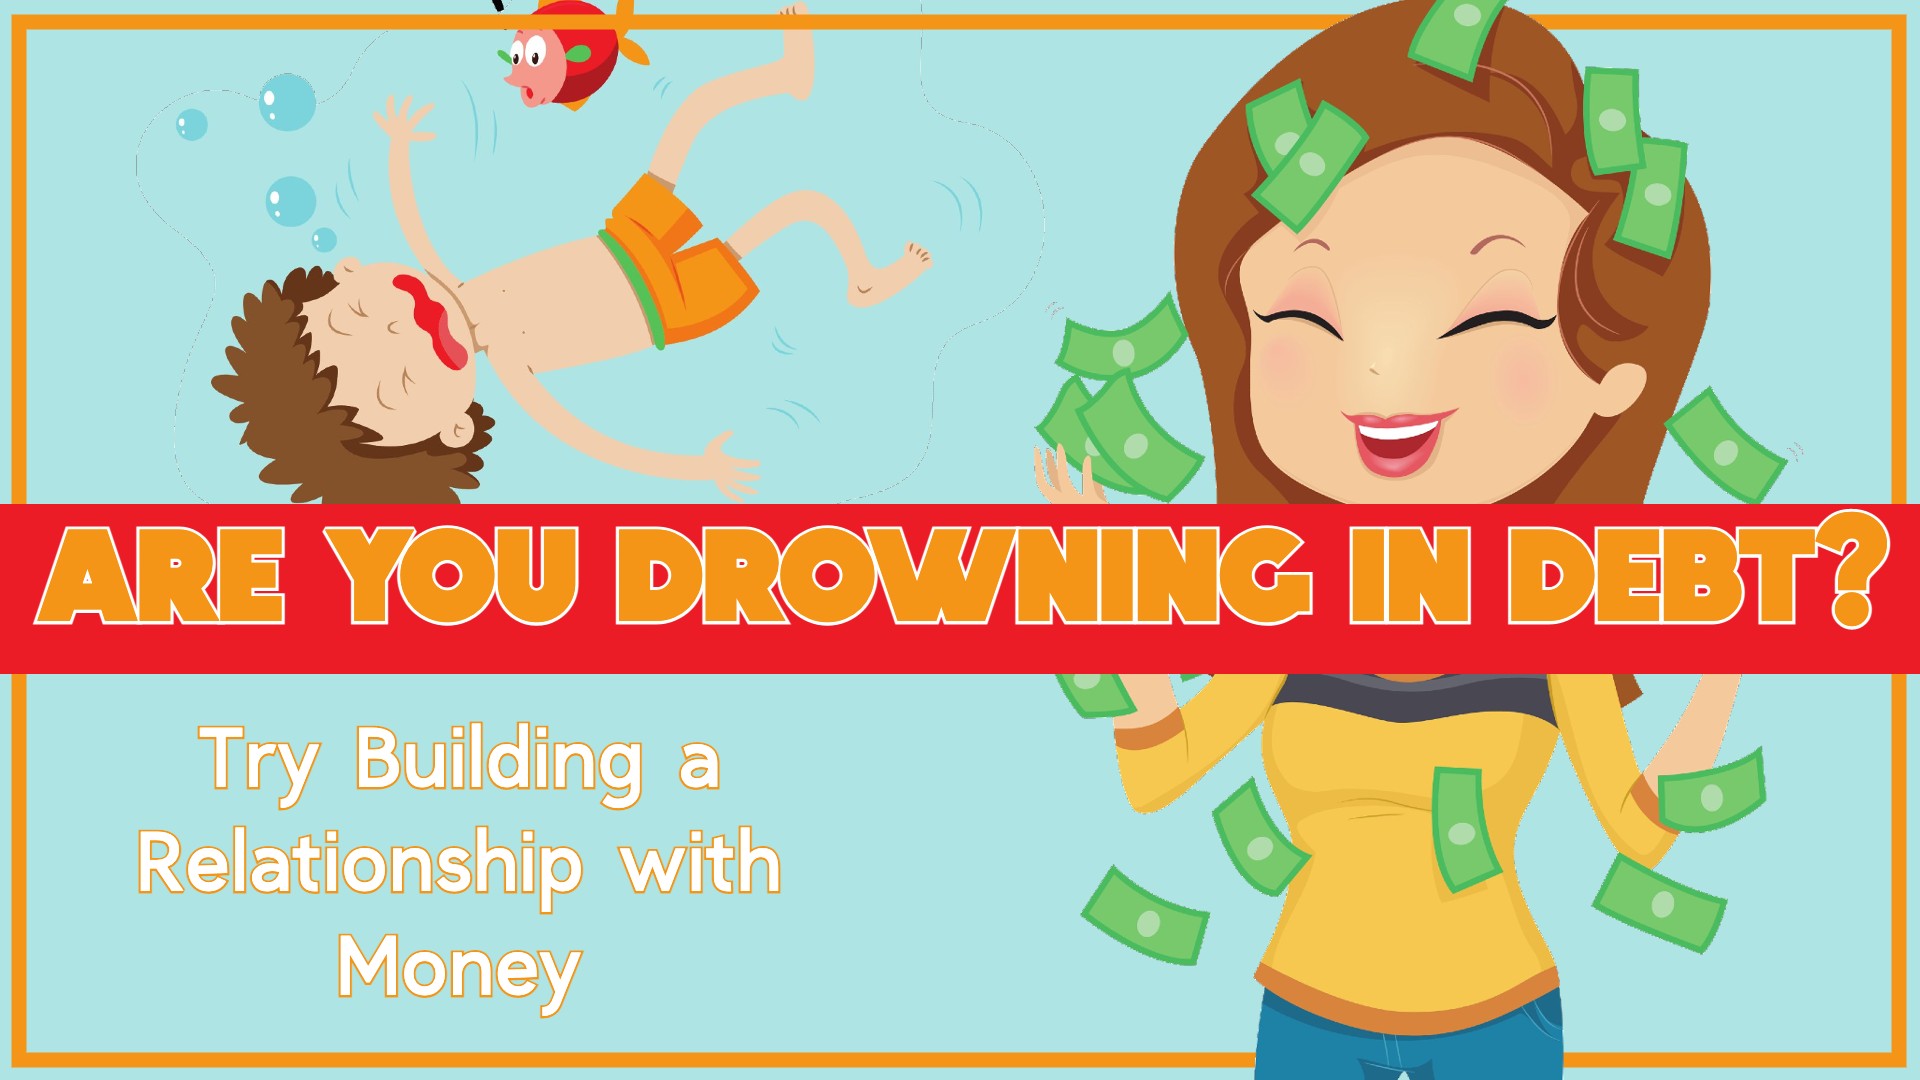 Are You Drowning in Debt?